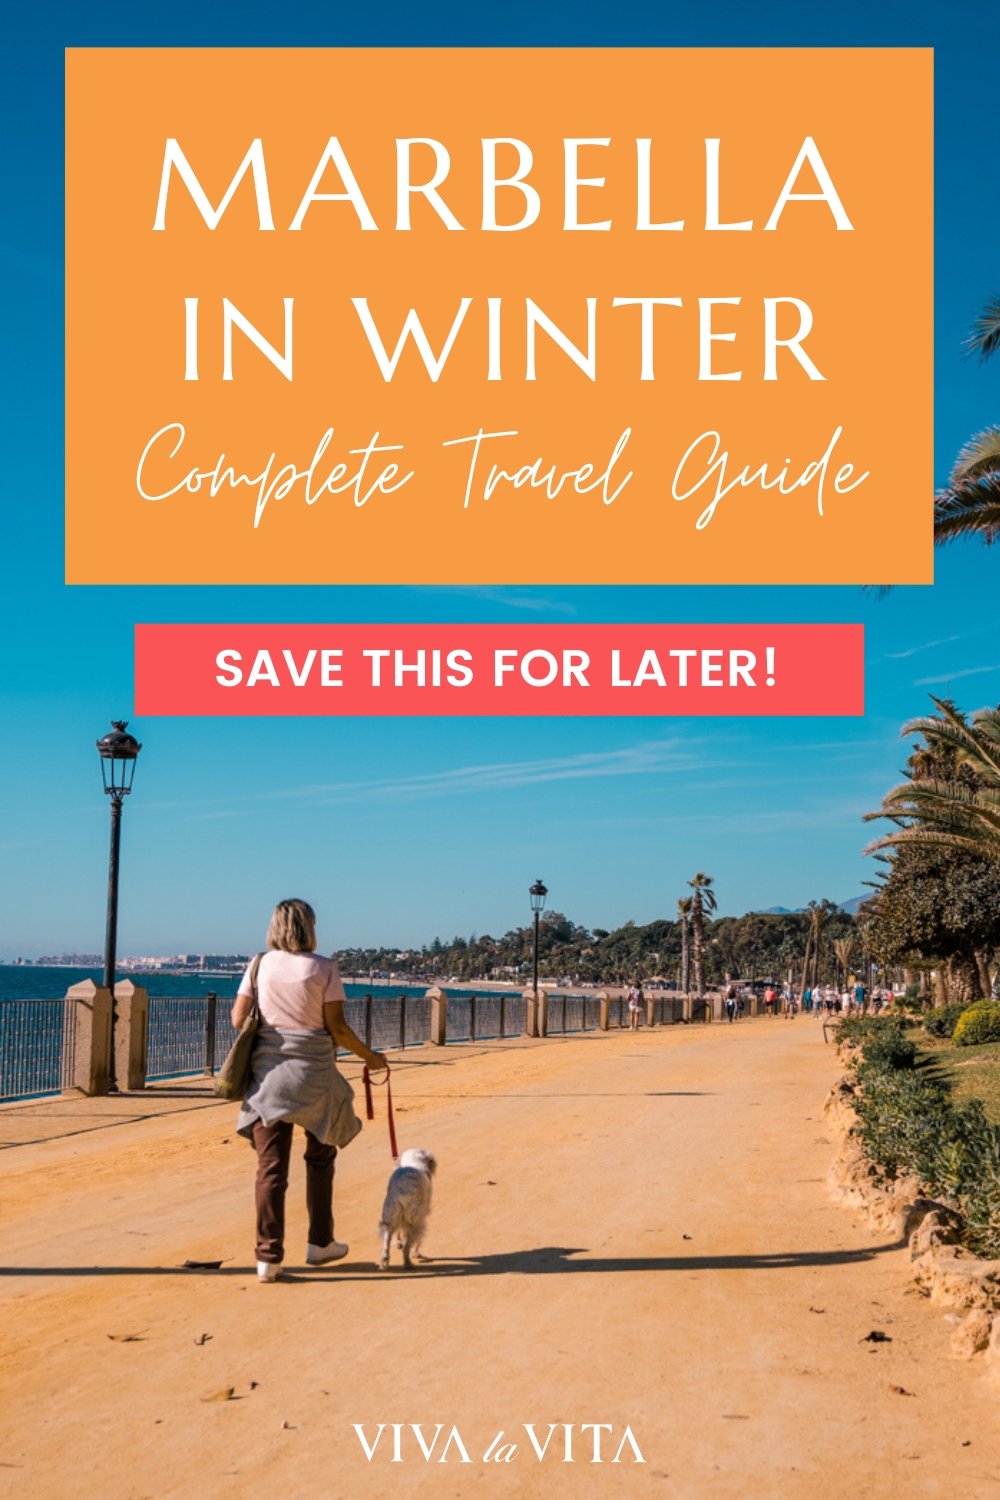 pinterest image showing a woman walking a dog on the coastal promenade in Marbela on Costa del Sol, with a headline - Marbella in winter, complete travel guide